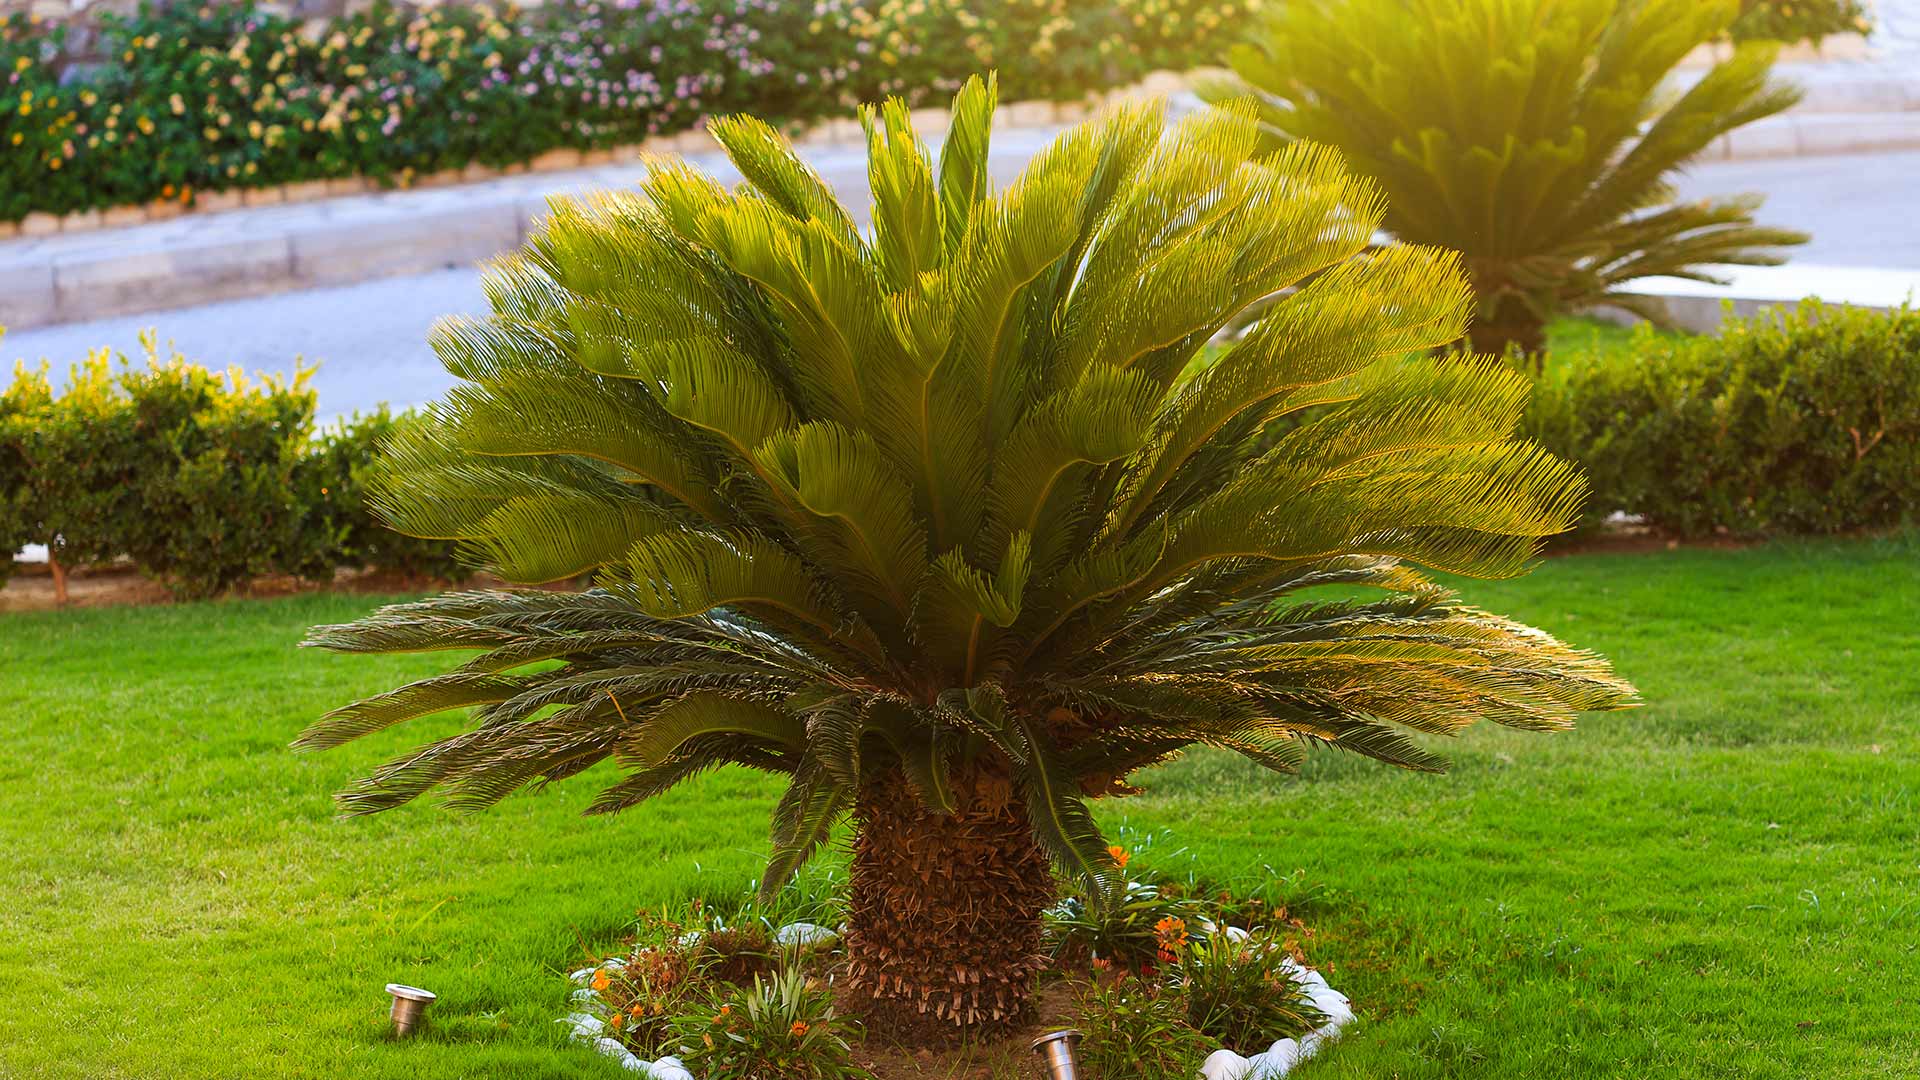 A beautiful palm tree in the front lawn of a home with a driveway and some landscaping in the background near Wildwood, FL.